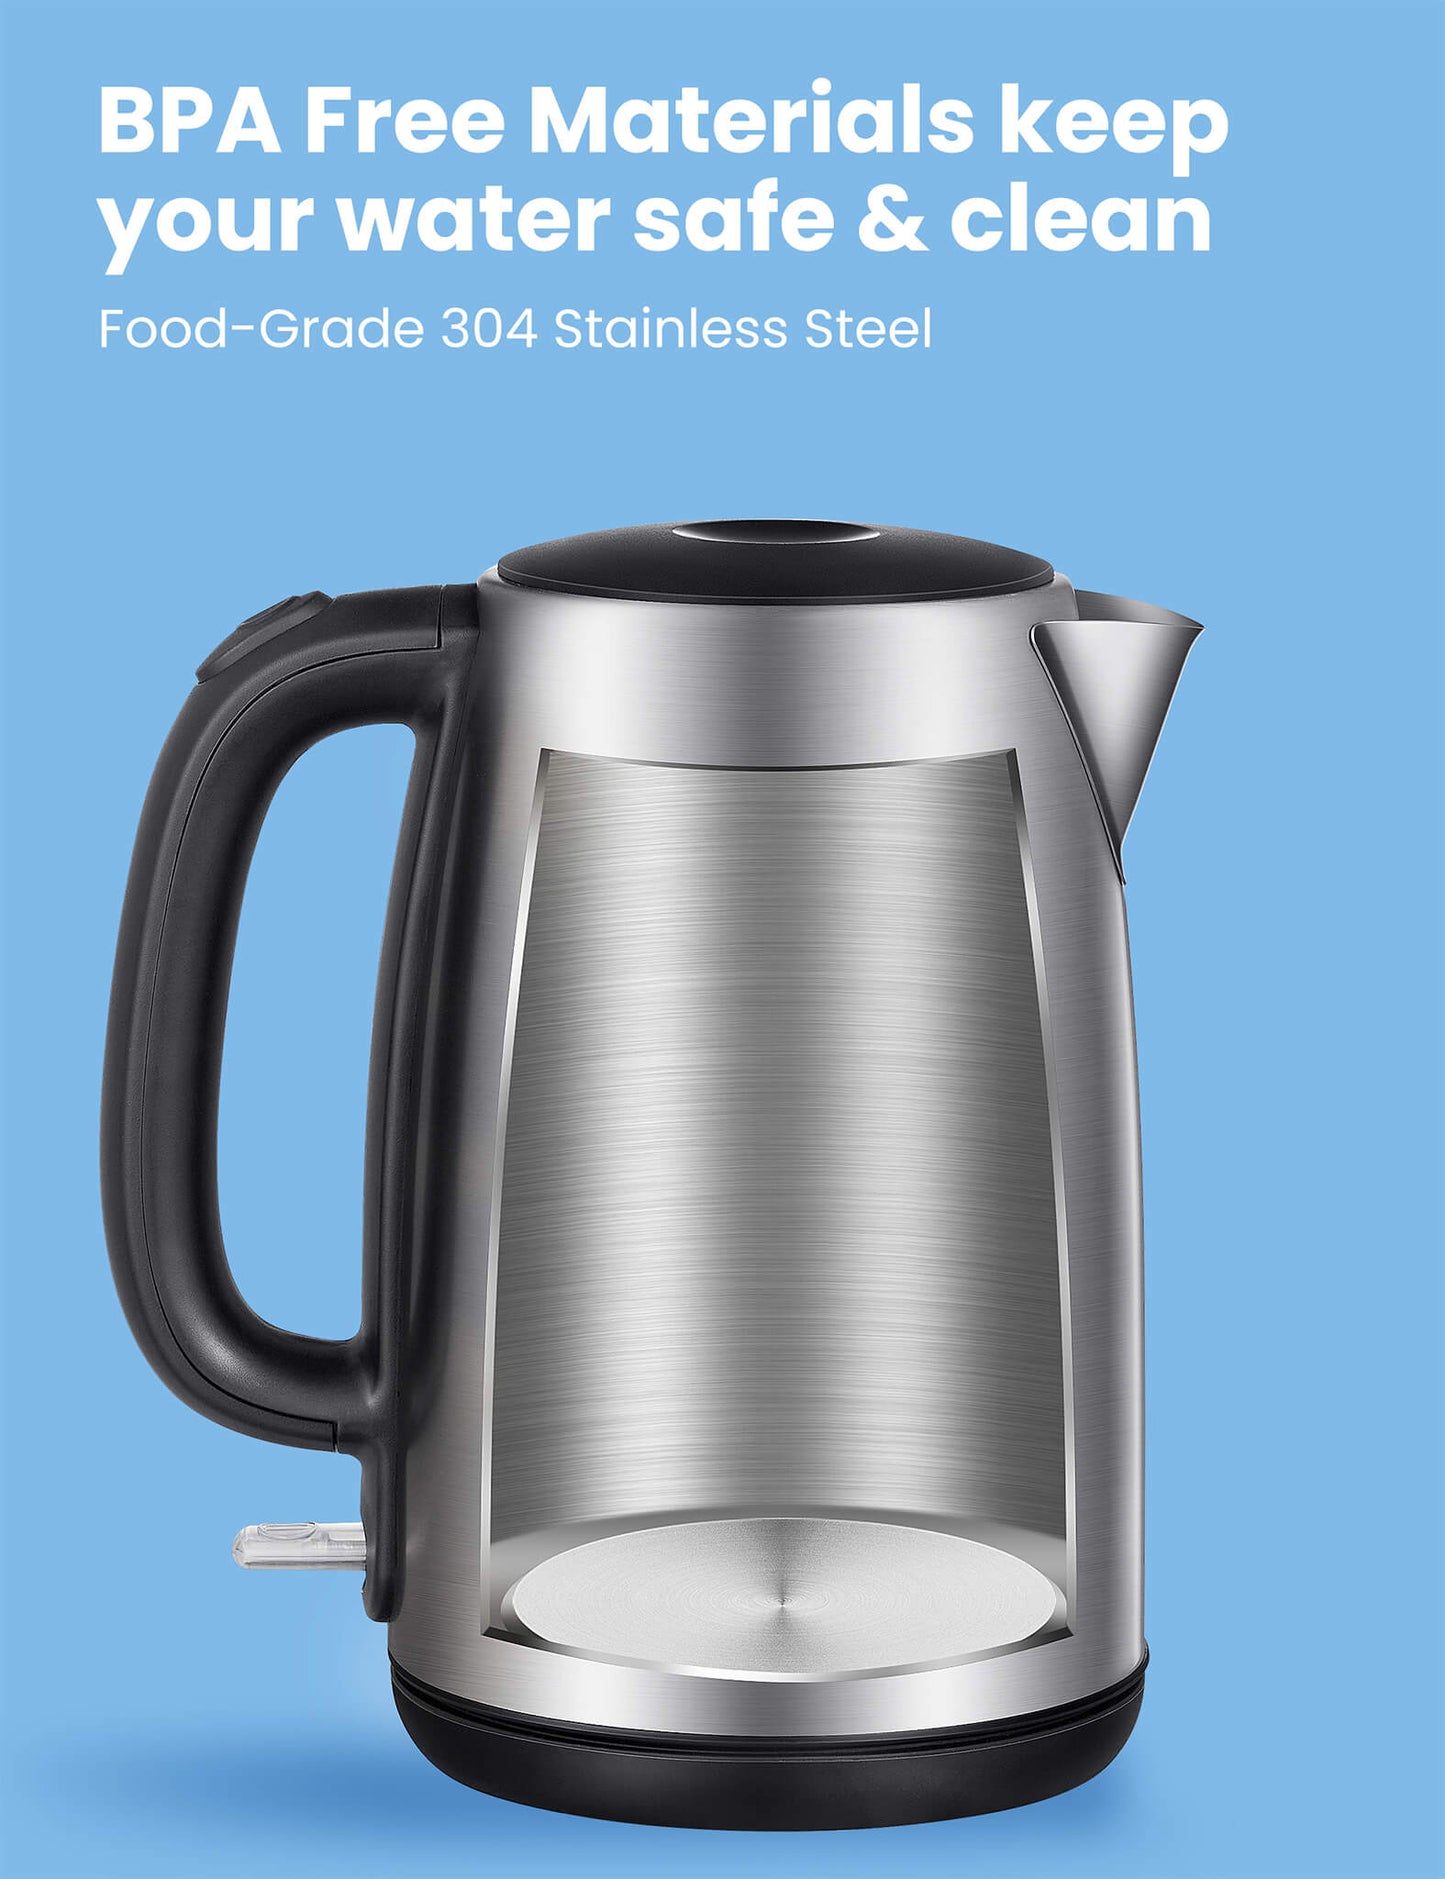 stainless steel electric kettle with BPA-free materials inside